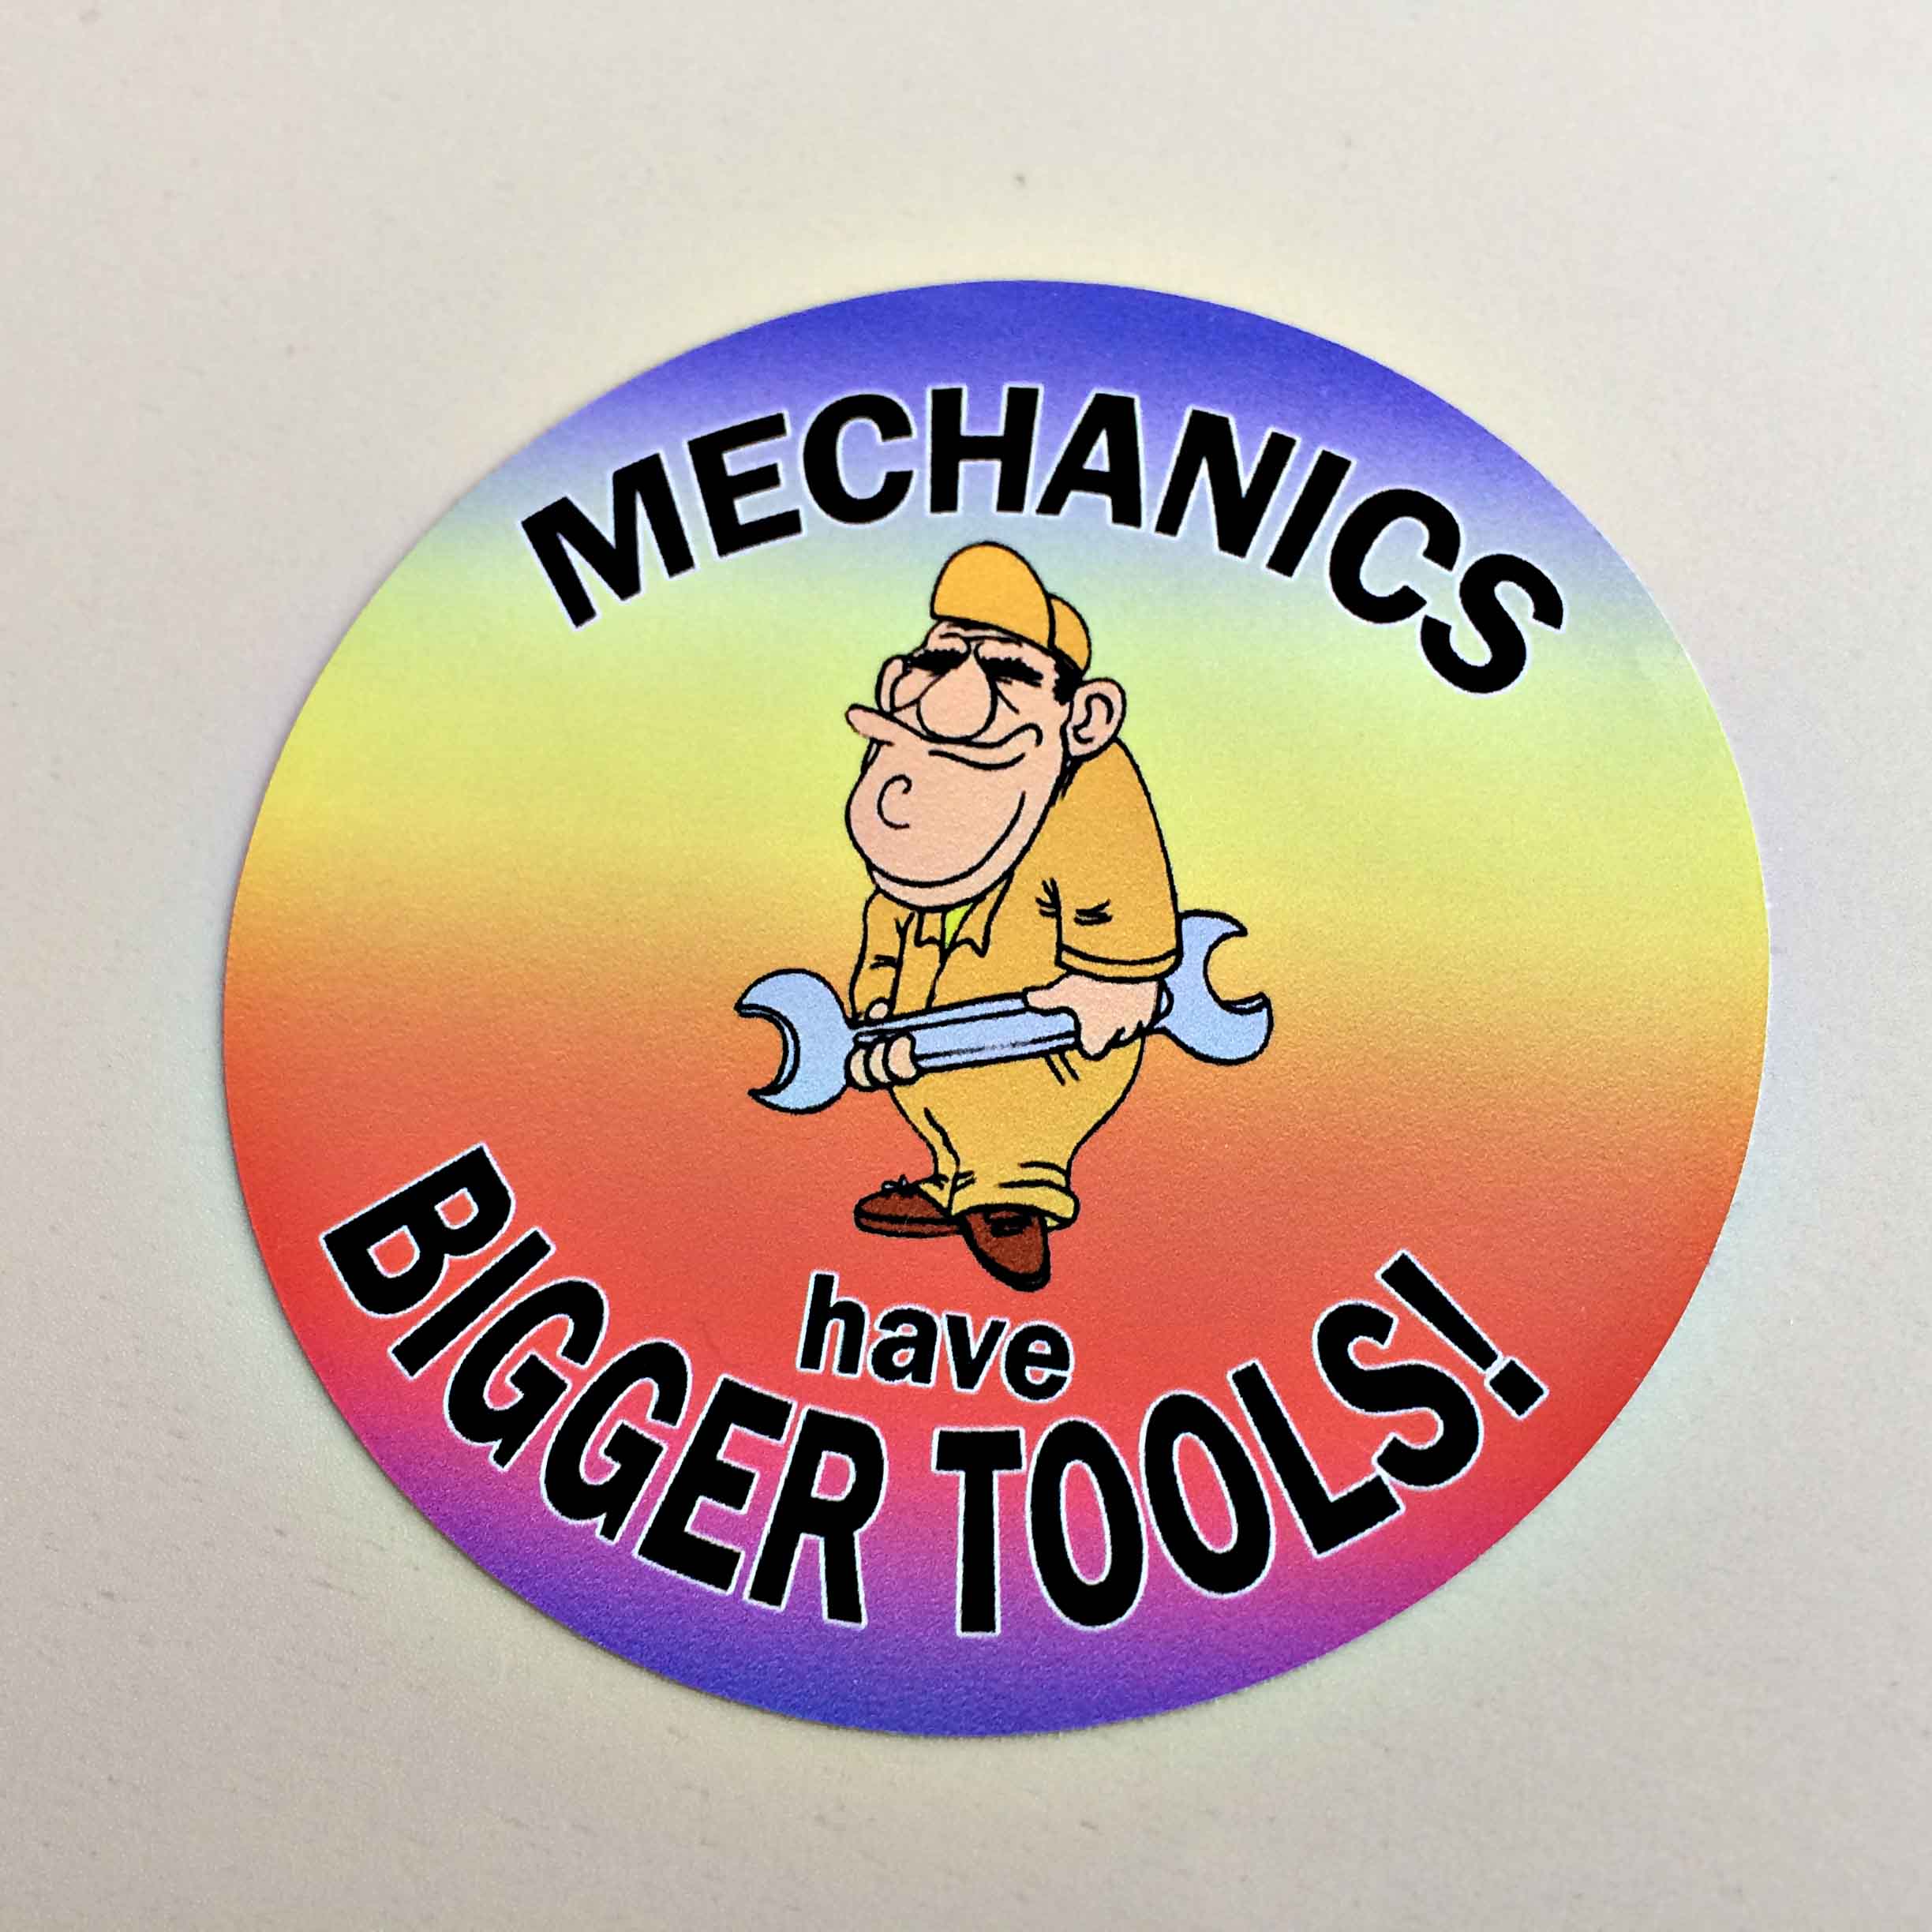 MECHANICS HAVE BIGGER TOOLS. Humorous cartoon character of a man holding a spanner on a rainbow coloured background. With the wording Mechanics Have Bigger Tools surrounding the image.